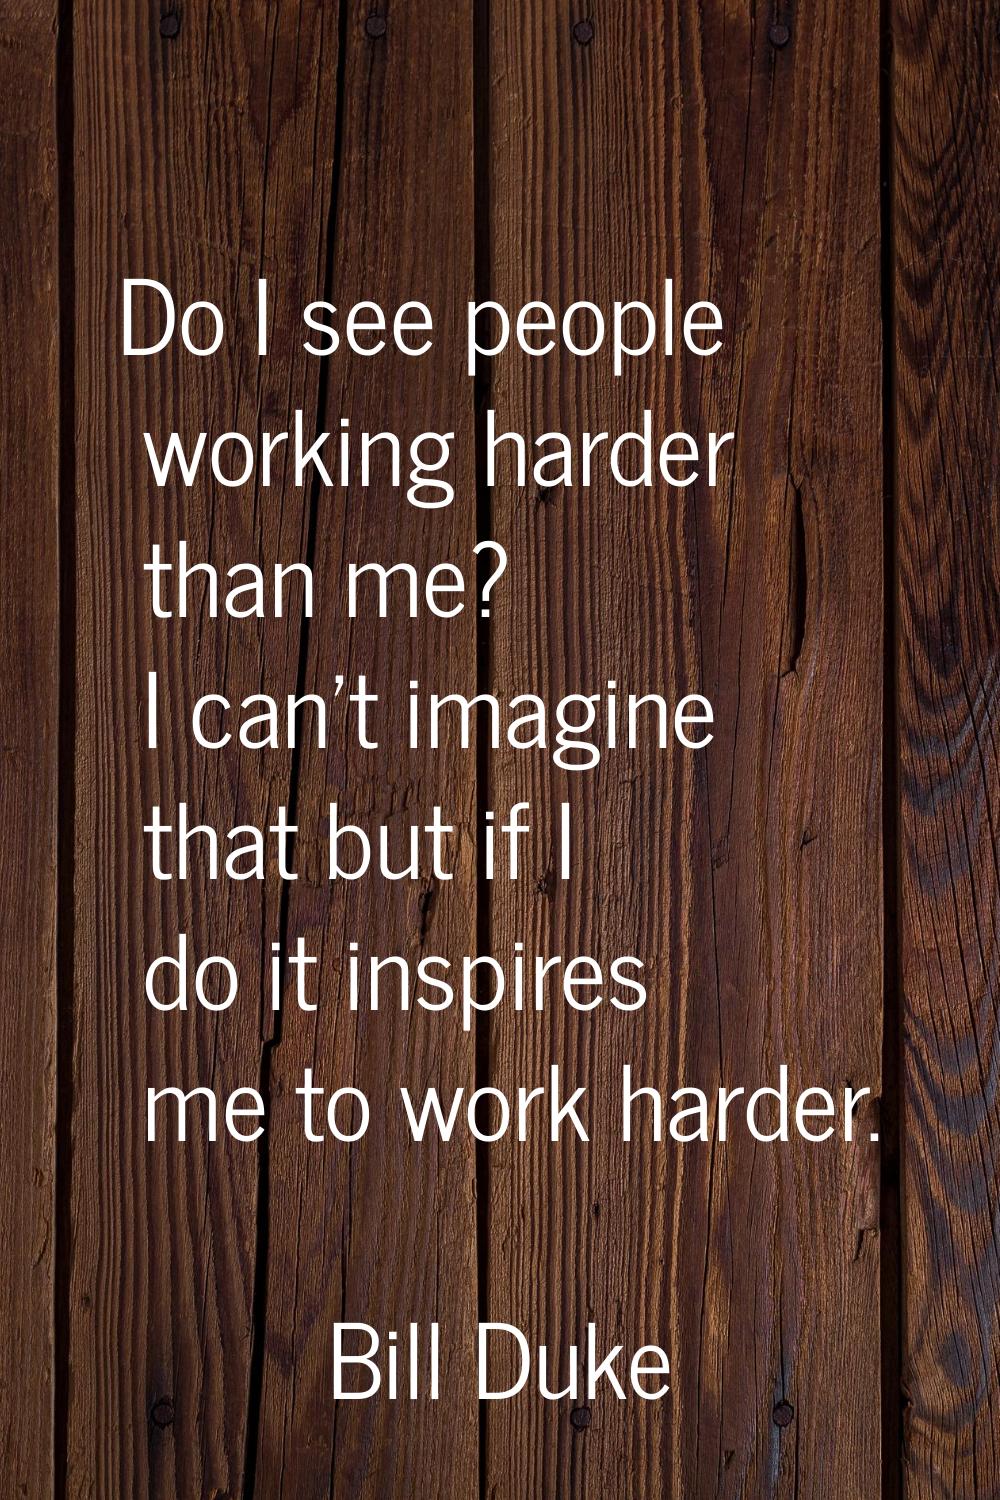 Do I see people working harder than me? I can't imagine that but if I do it inspires me to work har